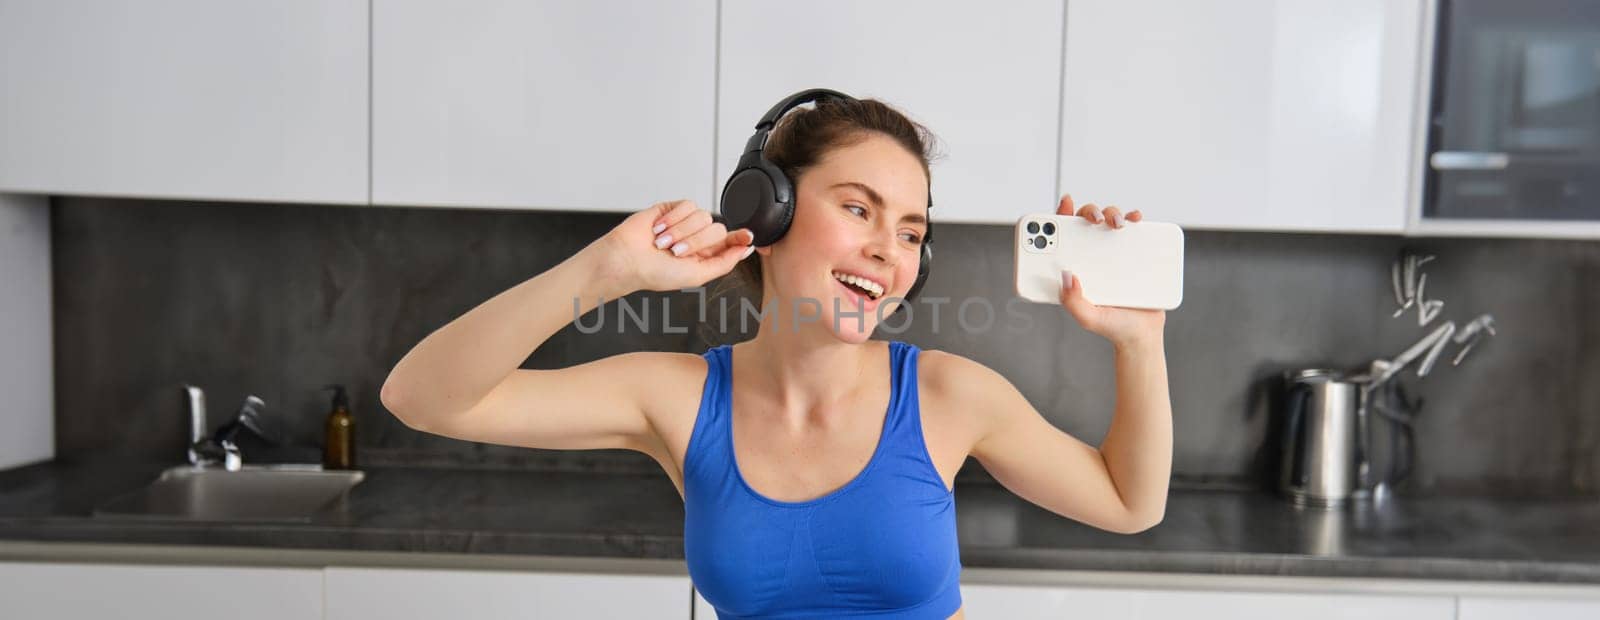 Portrait of beautiful fitness blogger, woman in headphones, listening music and dancing in kitchen, wearing blue leggings and sportsbra.